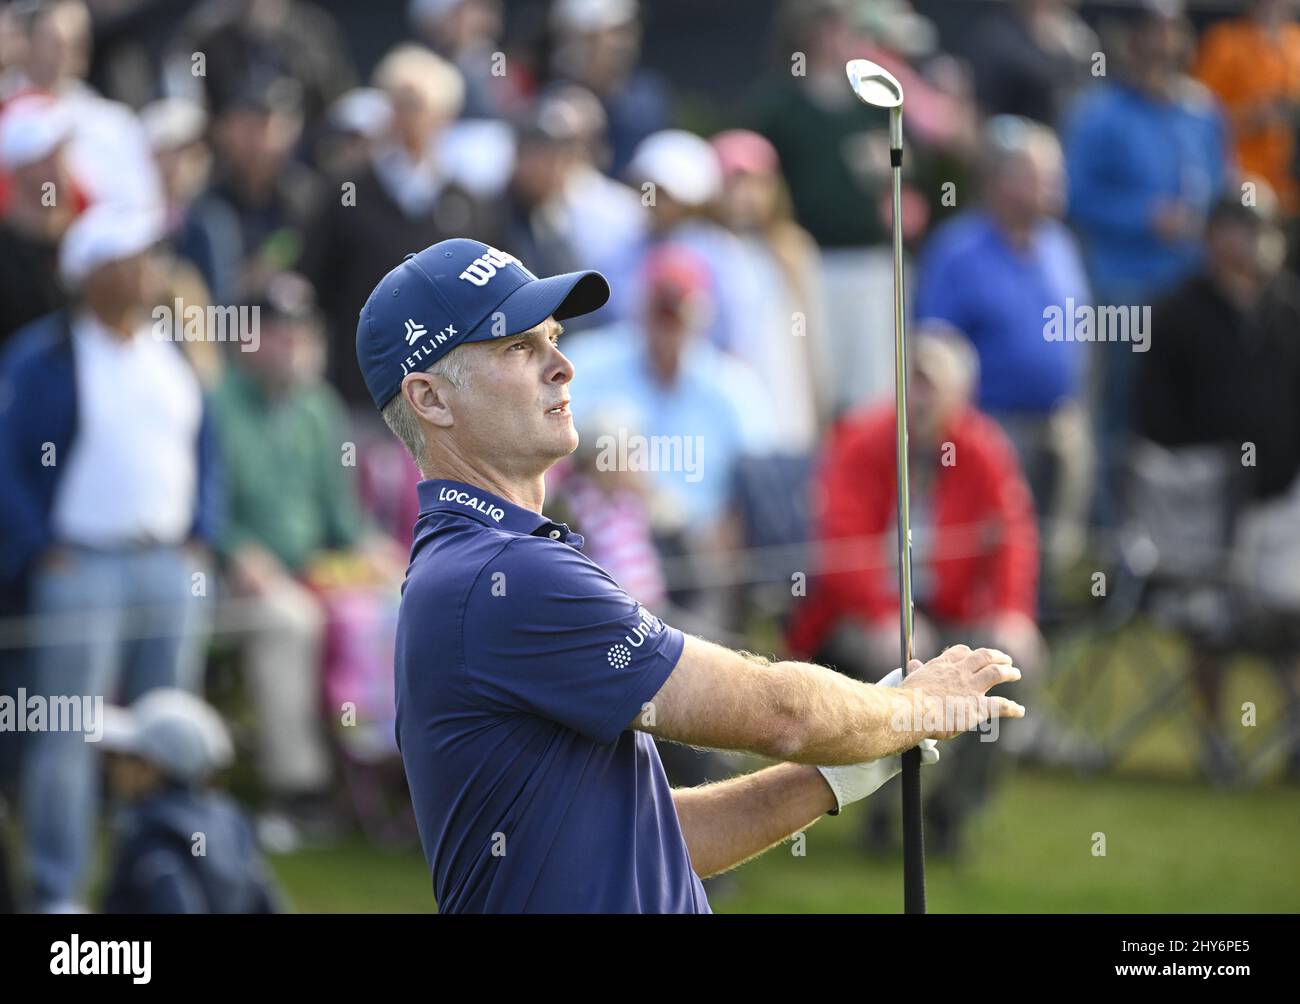 Ponte Vedra Beach, United States. 14th Mar, 2022. Kevin Streelman hits his tee shot on the 17th hole in the final round of the 2022 Players PGA Championship on the Stadium Course at TPC Sawgrass in Ponte Vedra Beach, Florida on Monday, March 14, 2022. Cameron Smith of Australia won the championship with a score of 13 under par. Photo by Joe Marino/UPI Credit: UPI/Alamy Live News Stock Photo